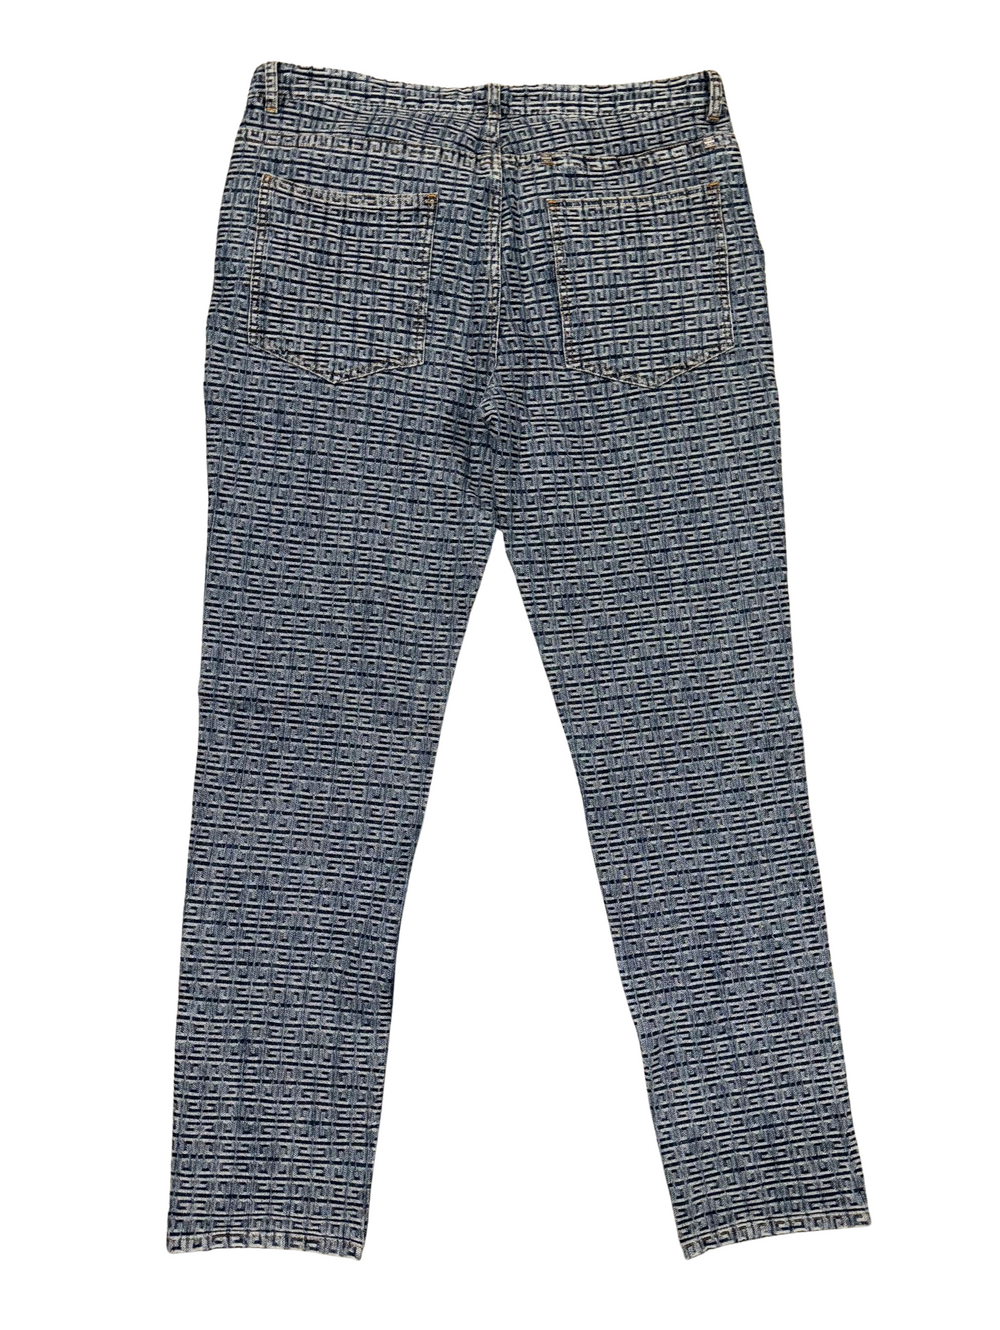 Givenchy 'All Over' 4G Embossed Blue Jeans